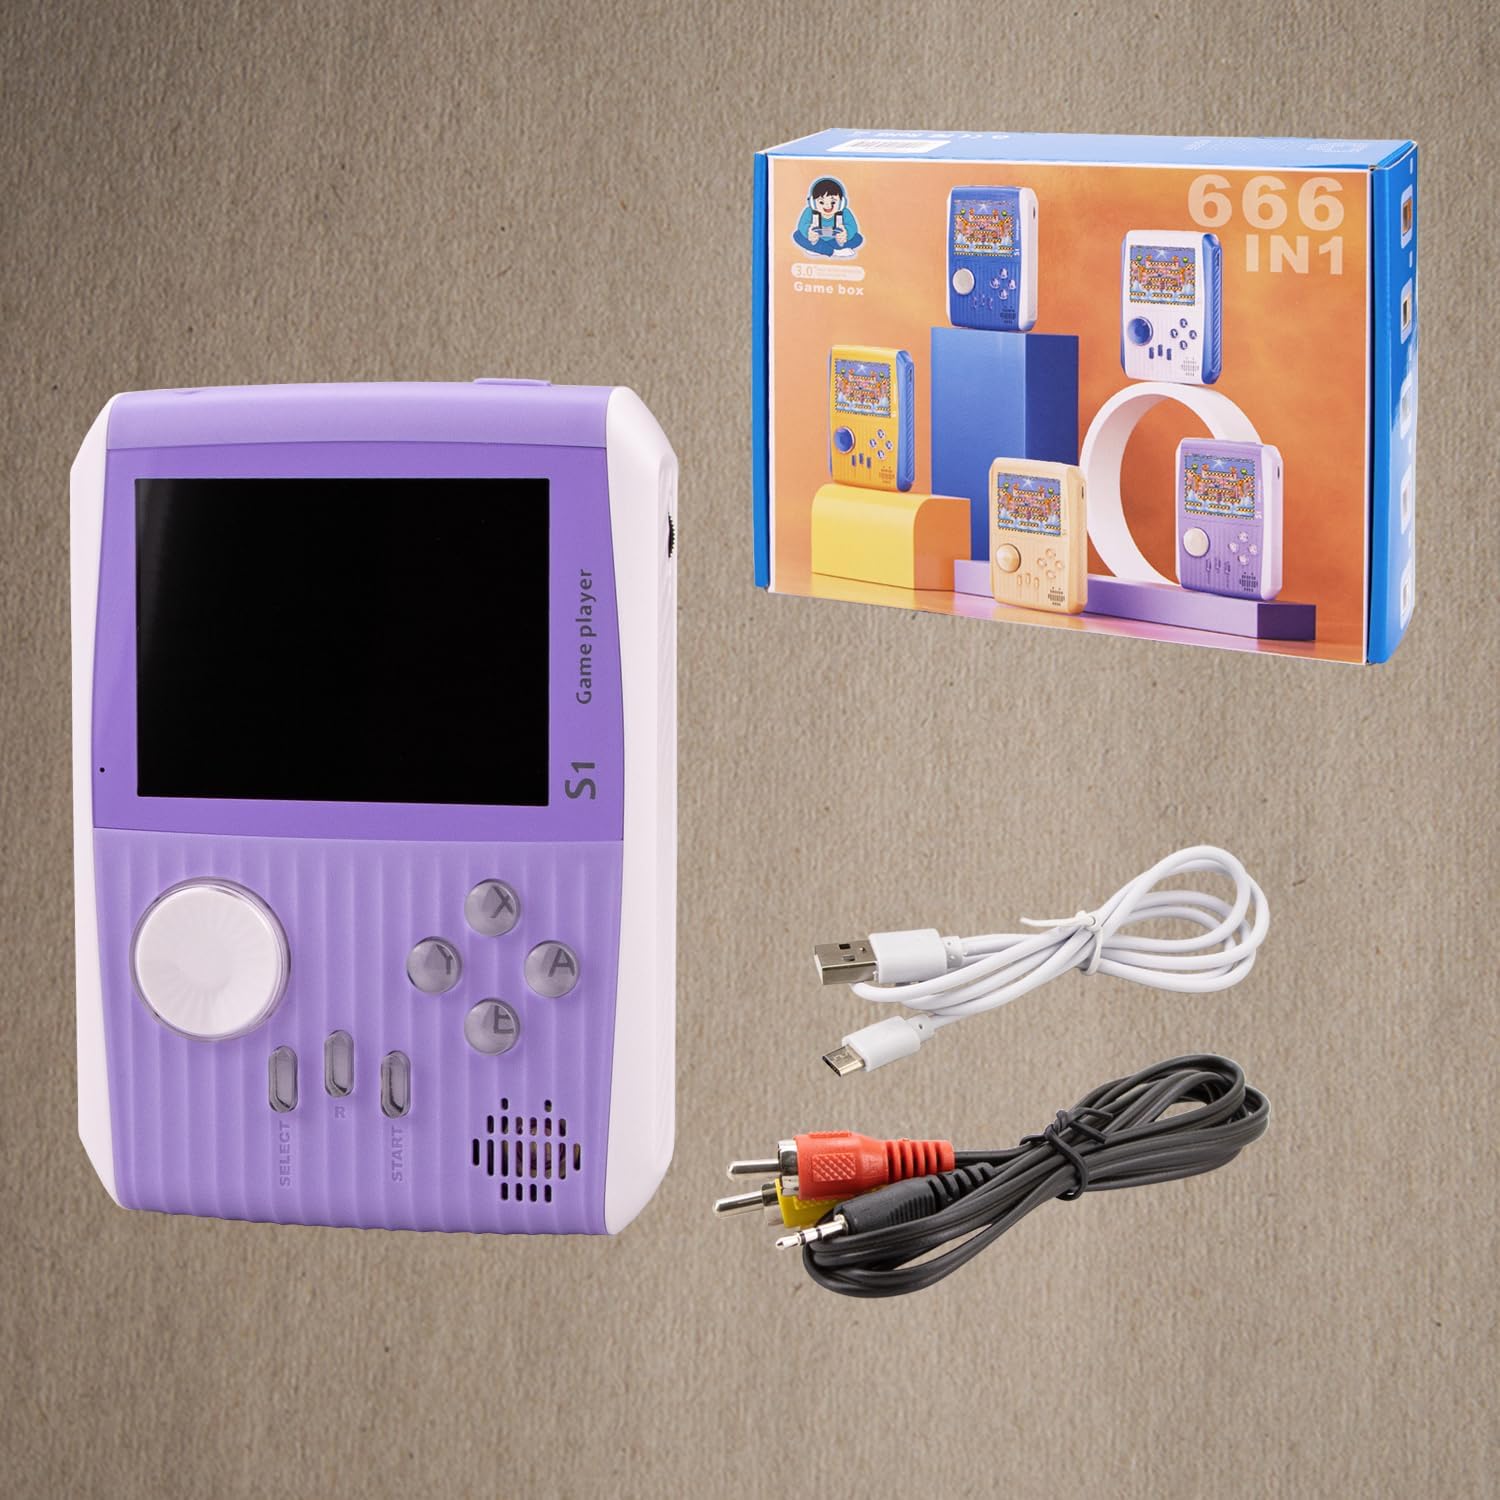 666 Classic Retro Toys for Kids, Rechargeable Battery 3 Inch Screen -Purple